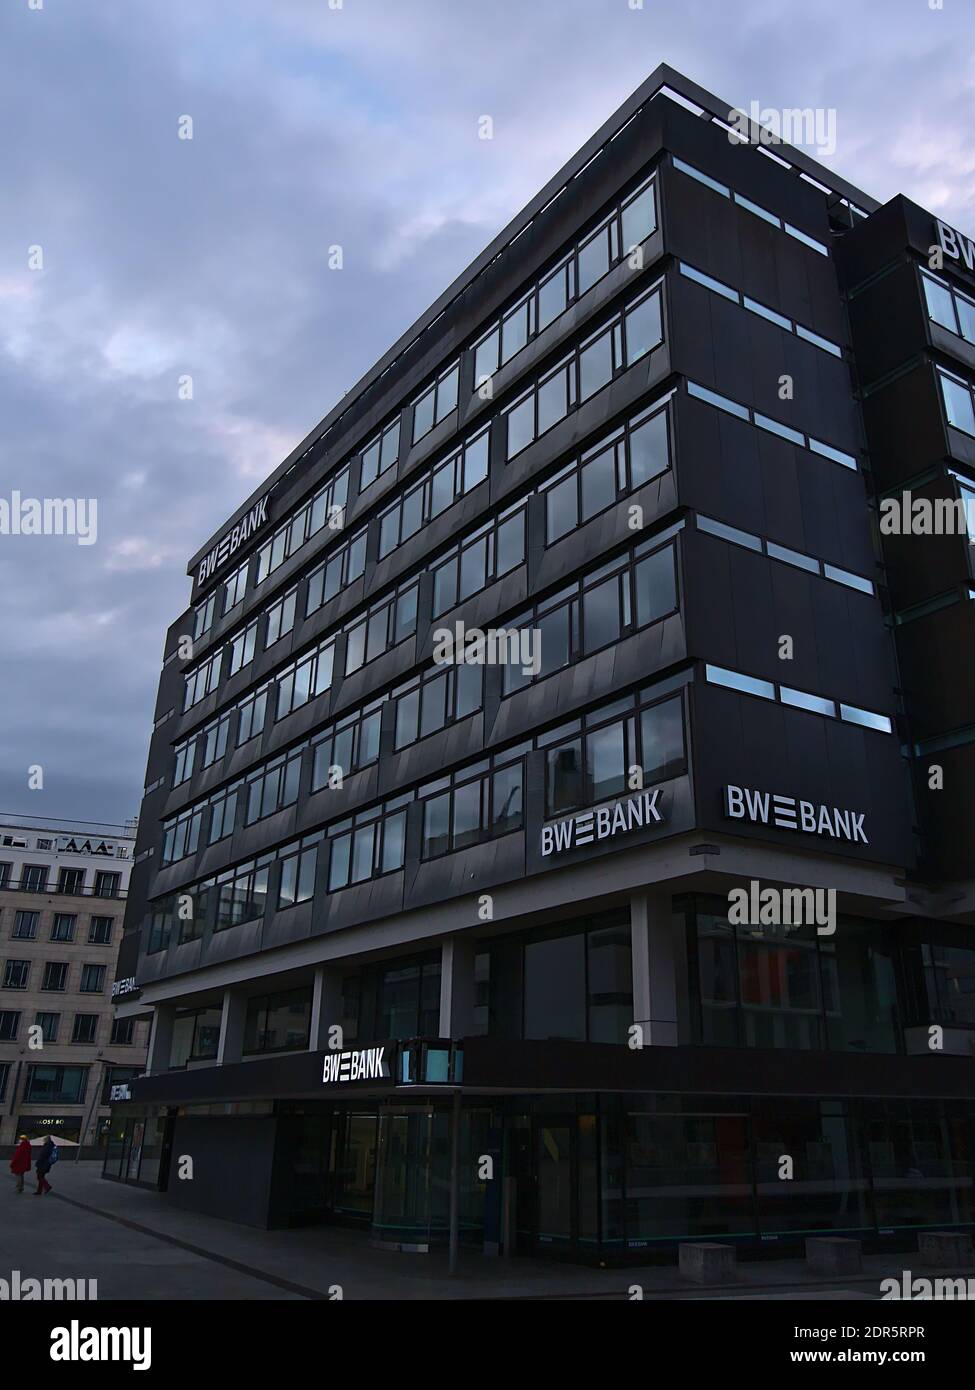 Building Of The Bw Bank High Resolution Stock Photography And Images Alamy